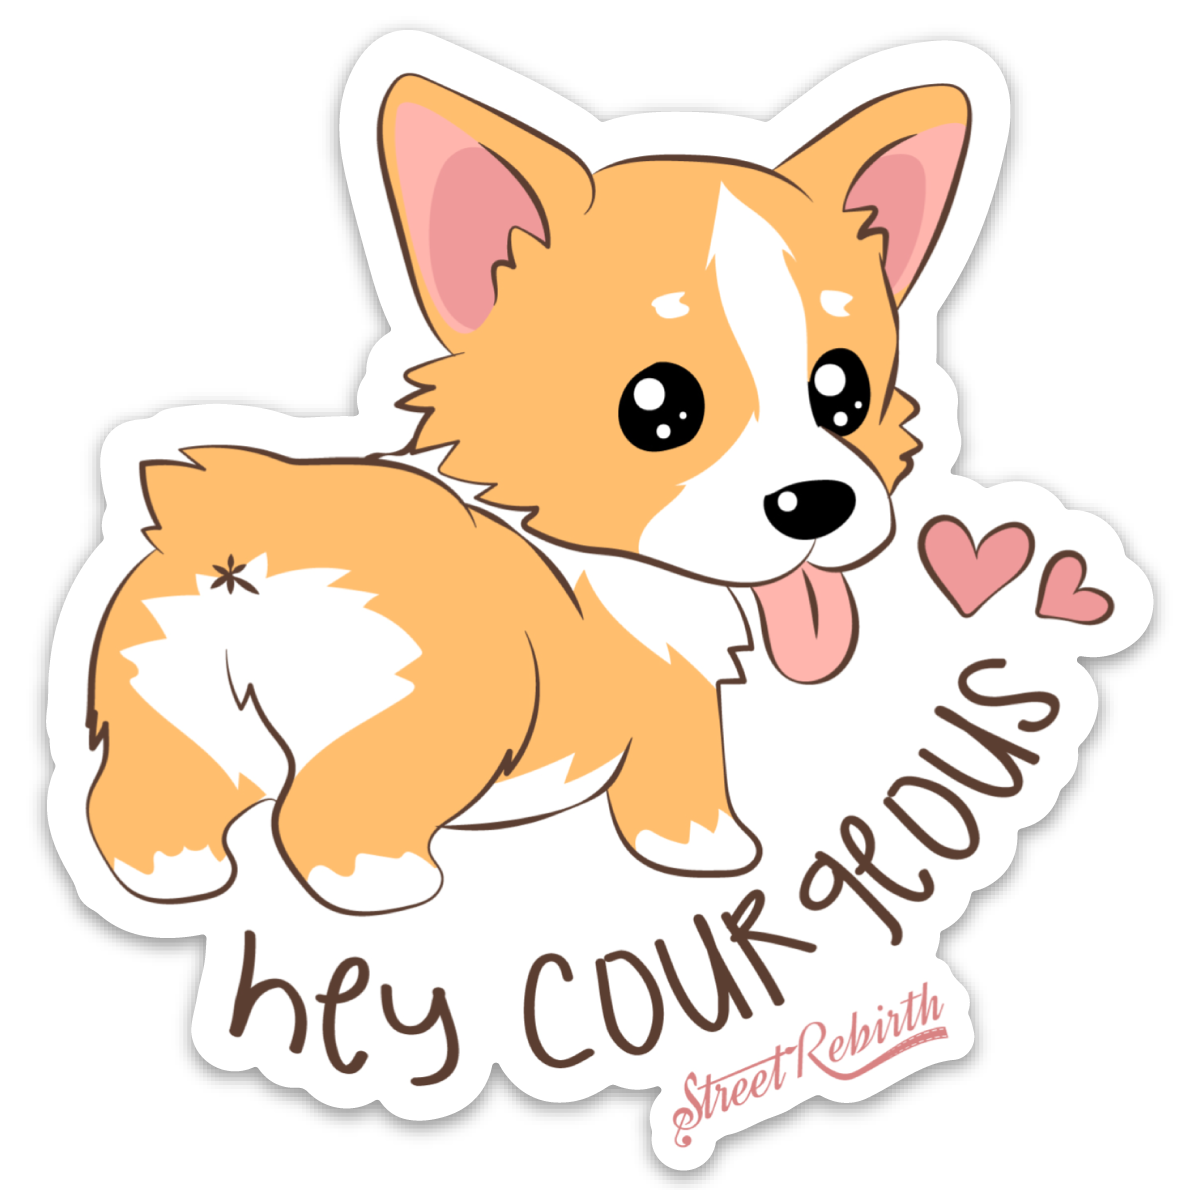 HEY COURGEOUS STICKER – ONE 4 INCH WATER PROOF VINYL STICKER – FOR HYDRO FLASK, SKATEBOARD, LAPTOP, PLANNER, CAR, COLLECTING, GIFTING